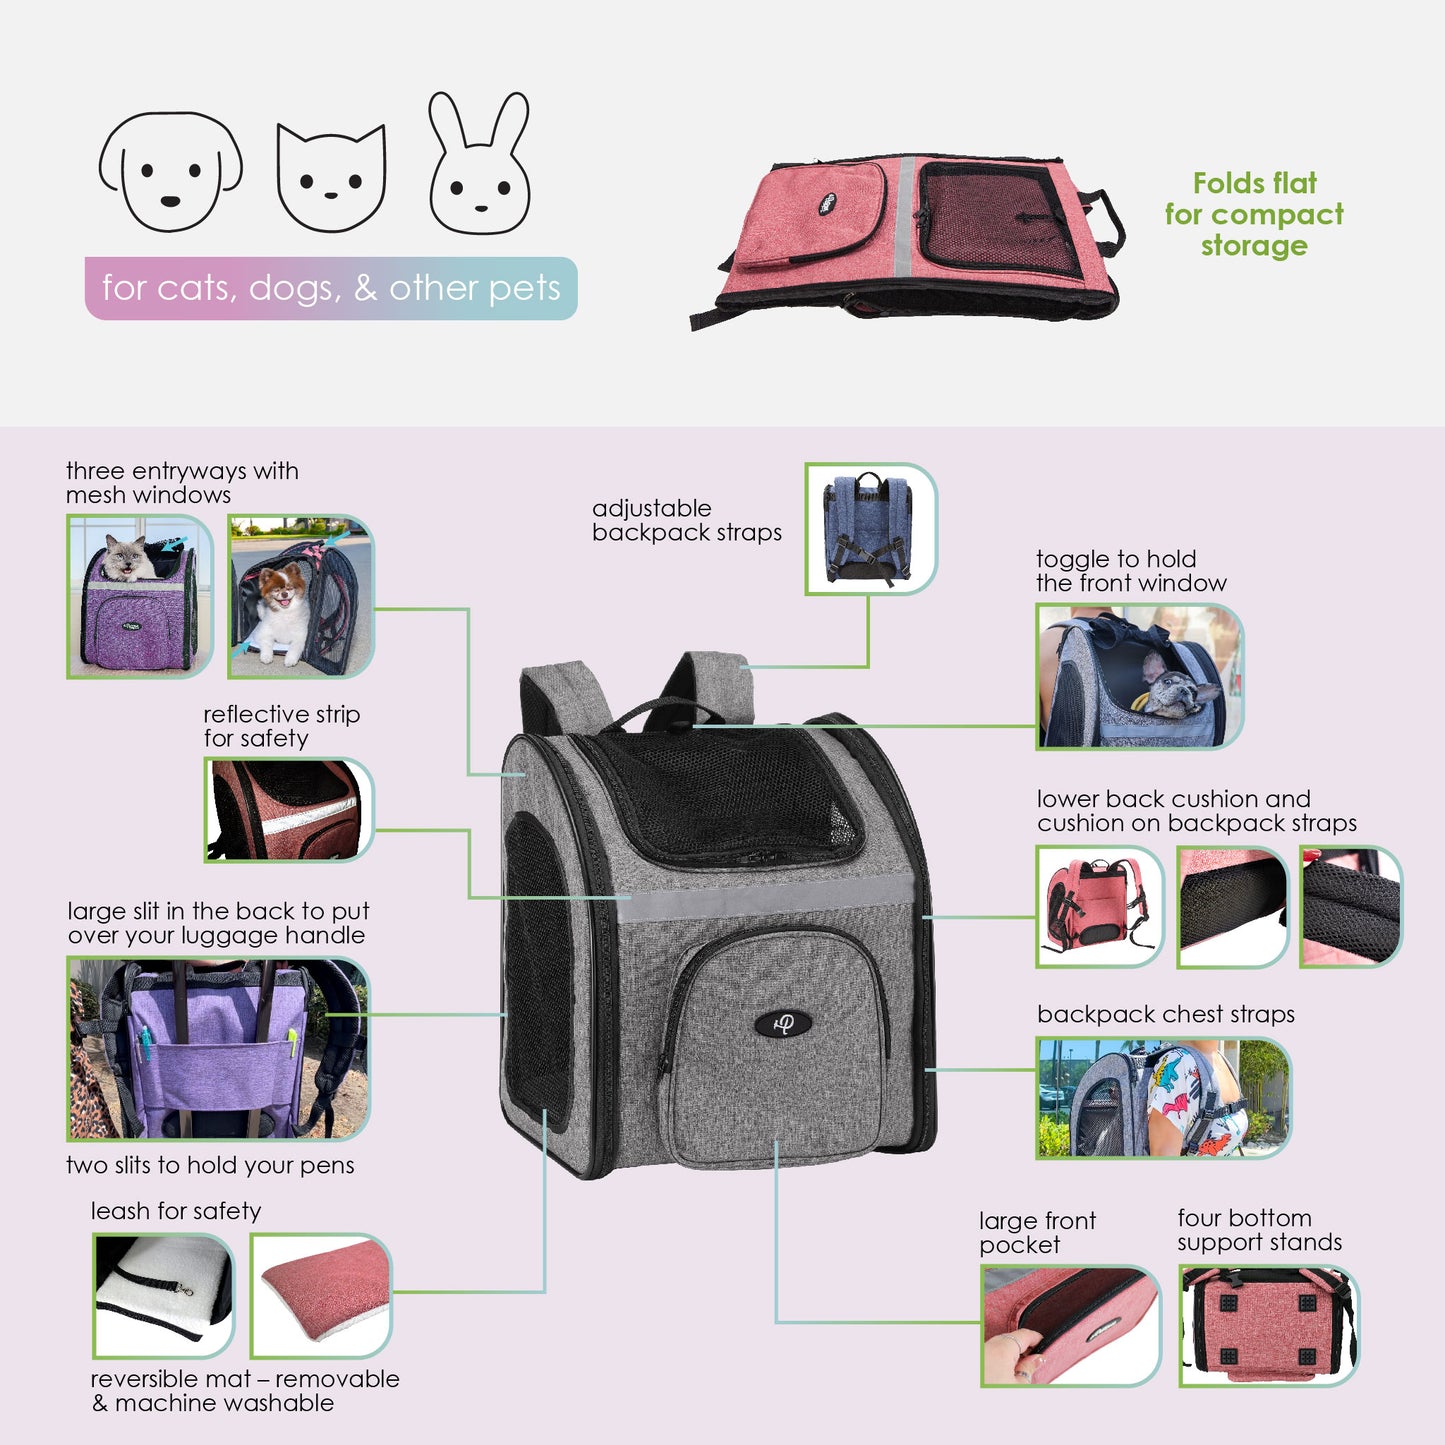 the backpack pet carrier features